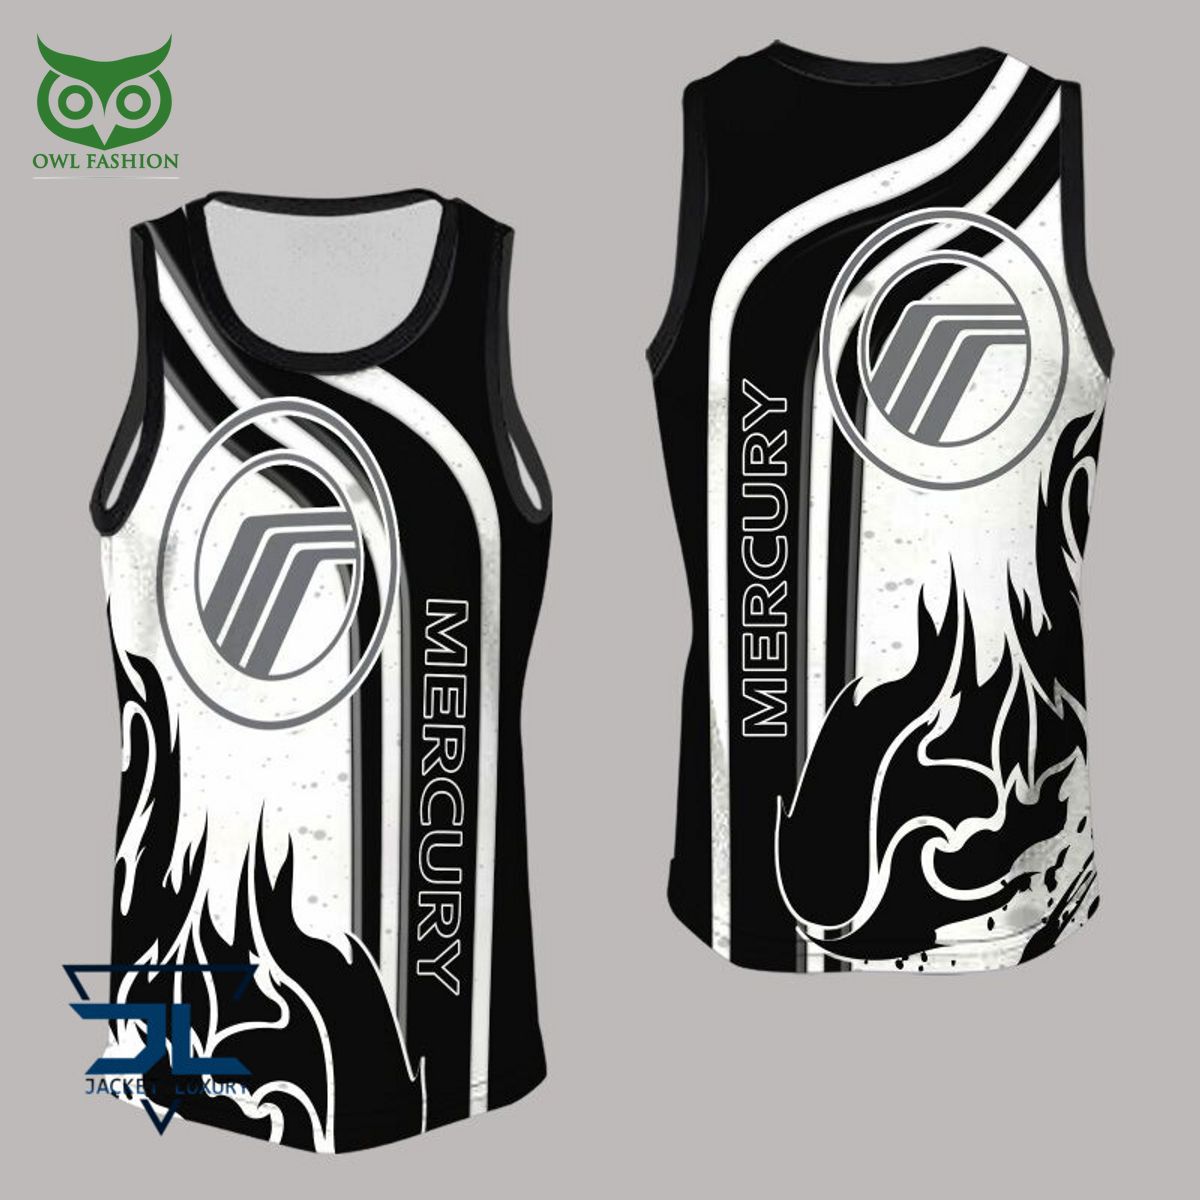 Branded, Stylish and Premium Quality sublimation hoodie jersey